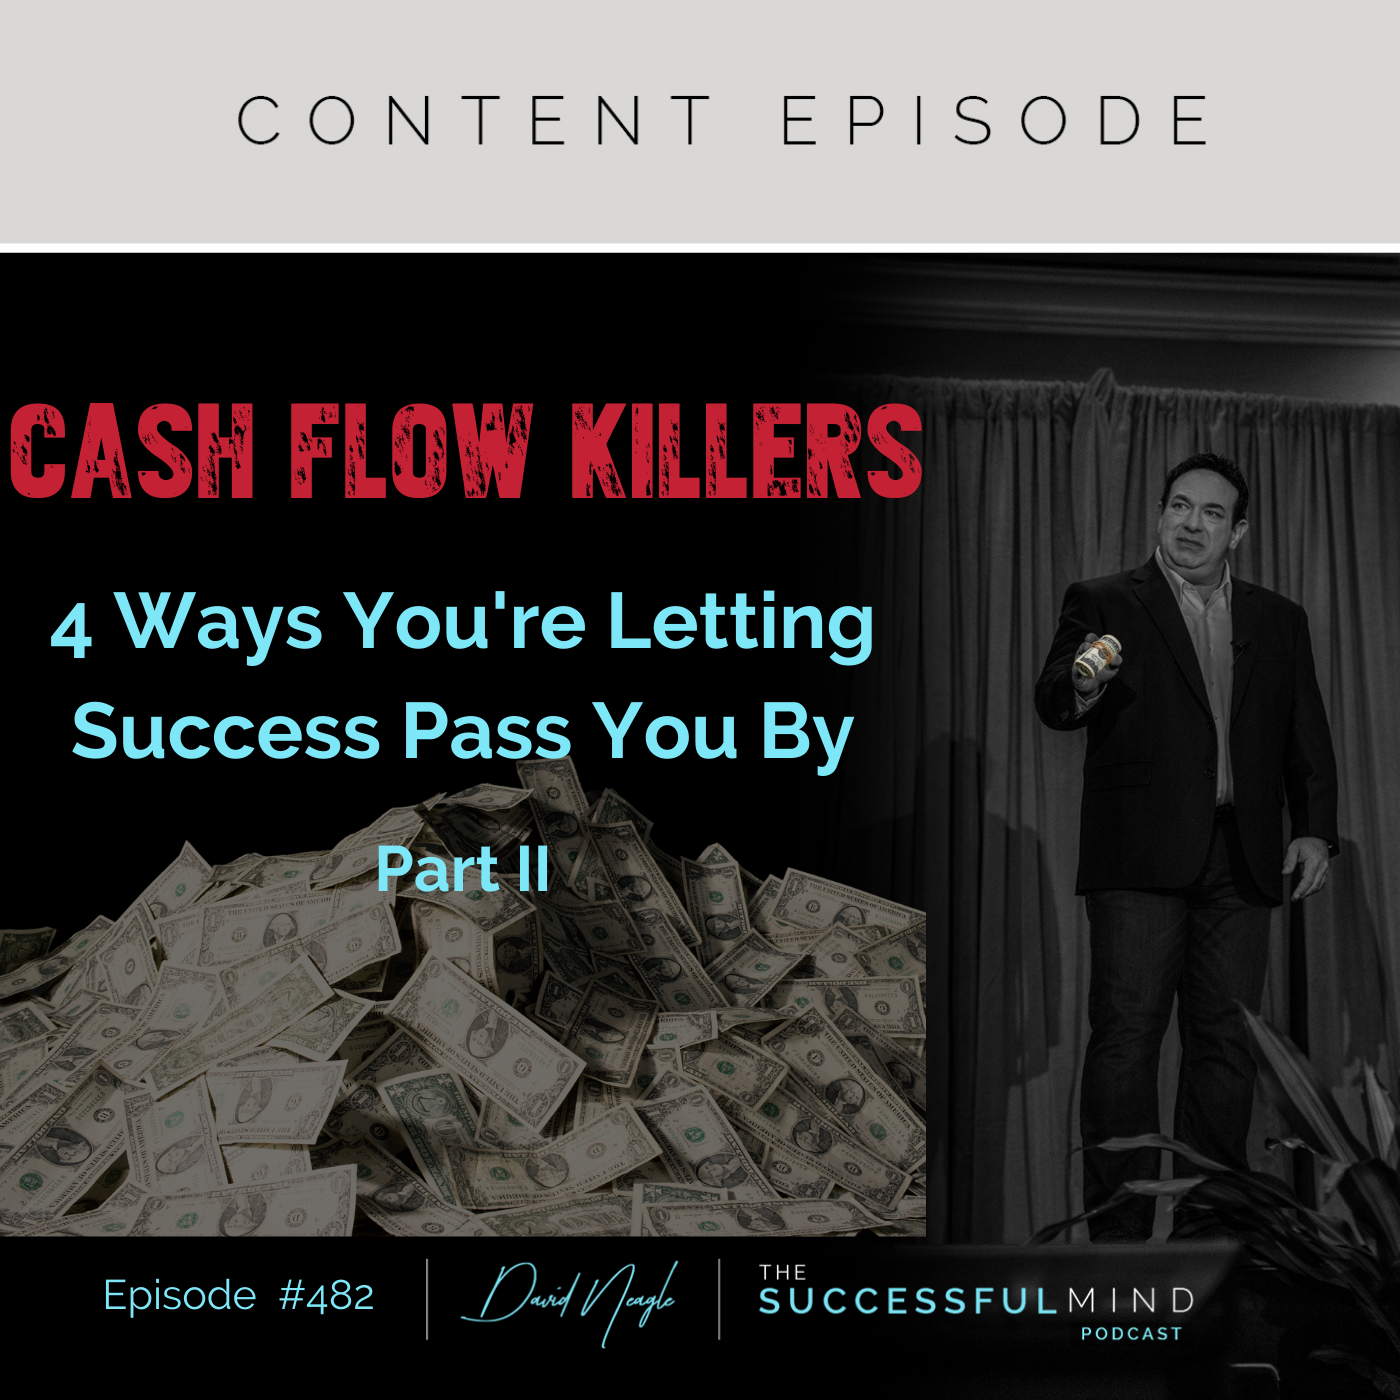 The Successful Mind Podcast - Episode 482 - Cash Flow Killers - Part II